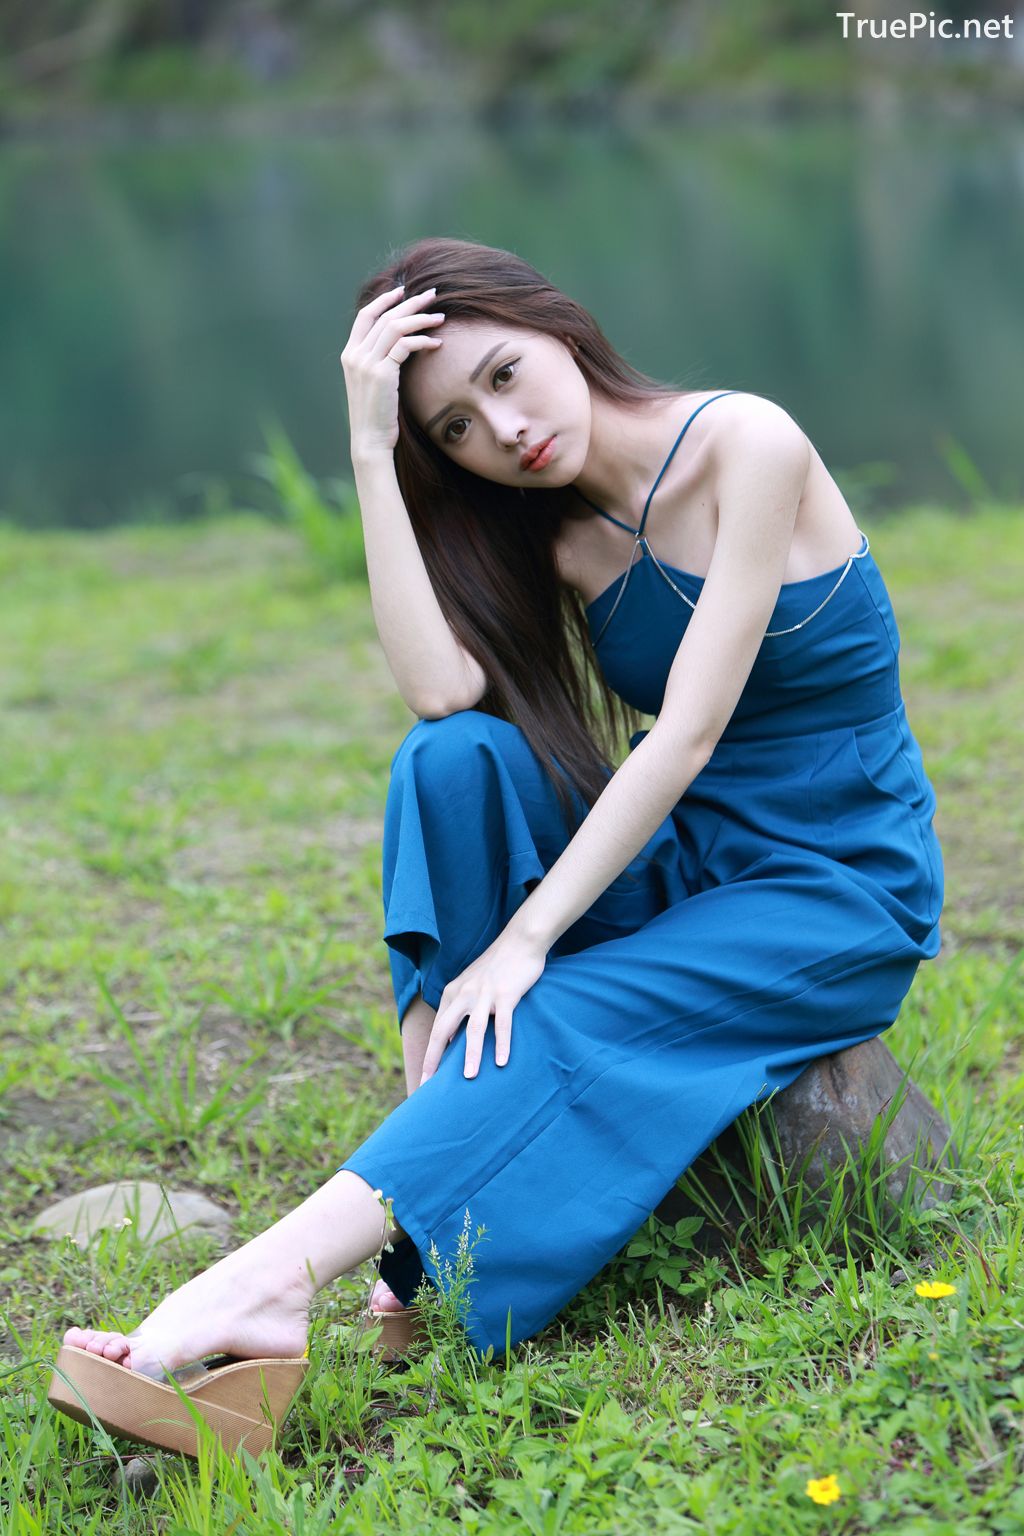 Image-Taiwanese-Pure-Girl-承容-Young-Beautiful-And-Lovely-TruePic.net- Picture-41